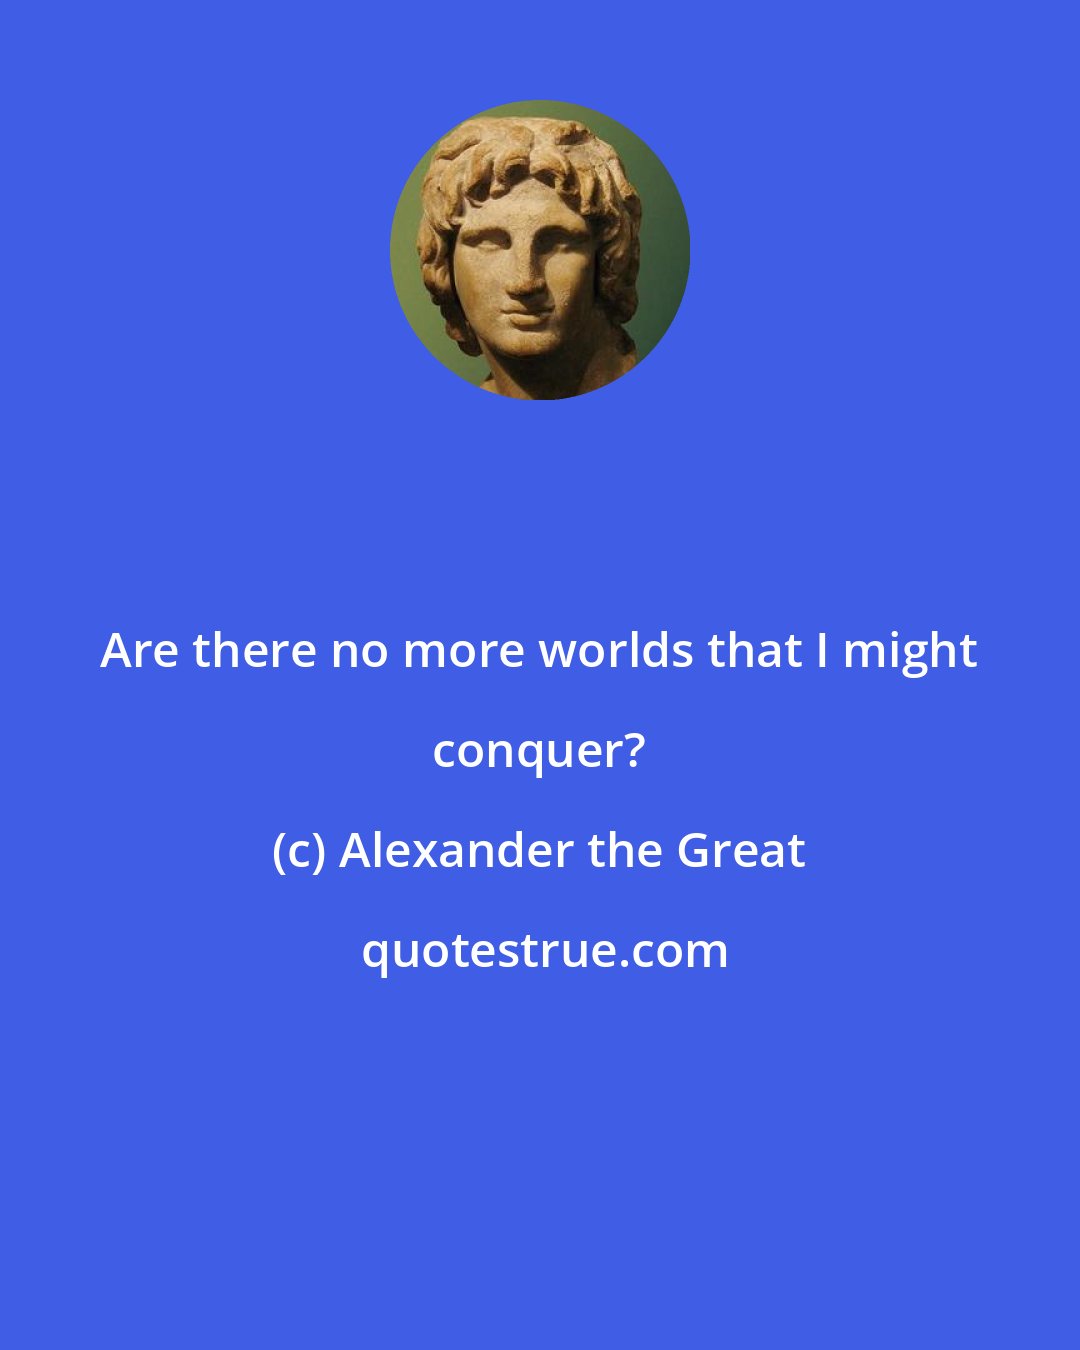 Alexander the Great: Are there no more worlds that I might conquer?